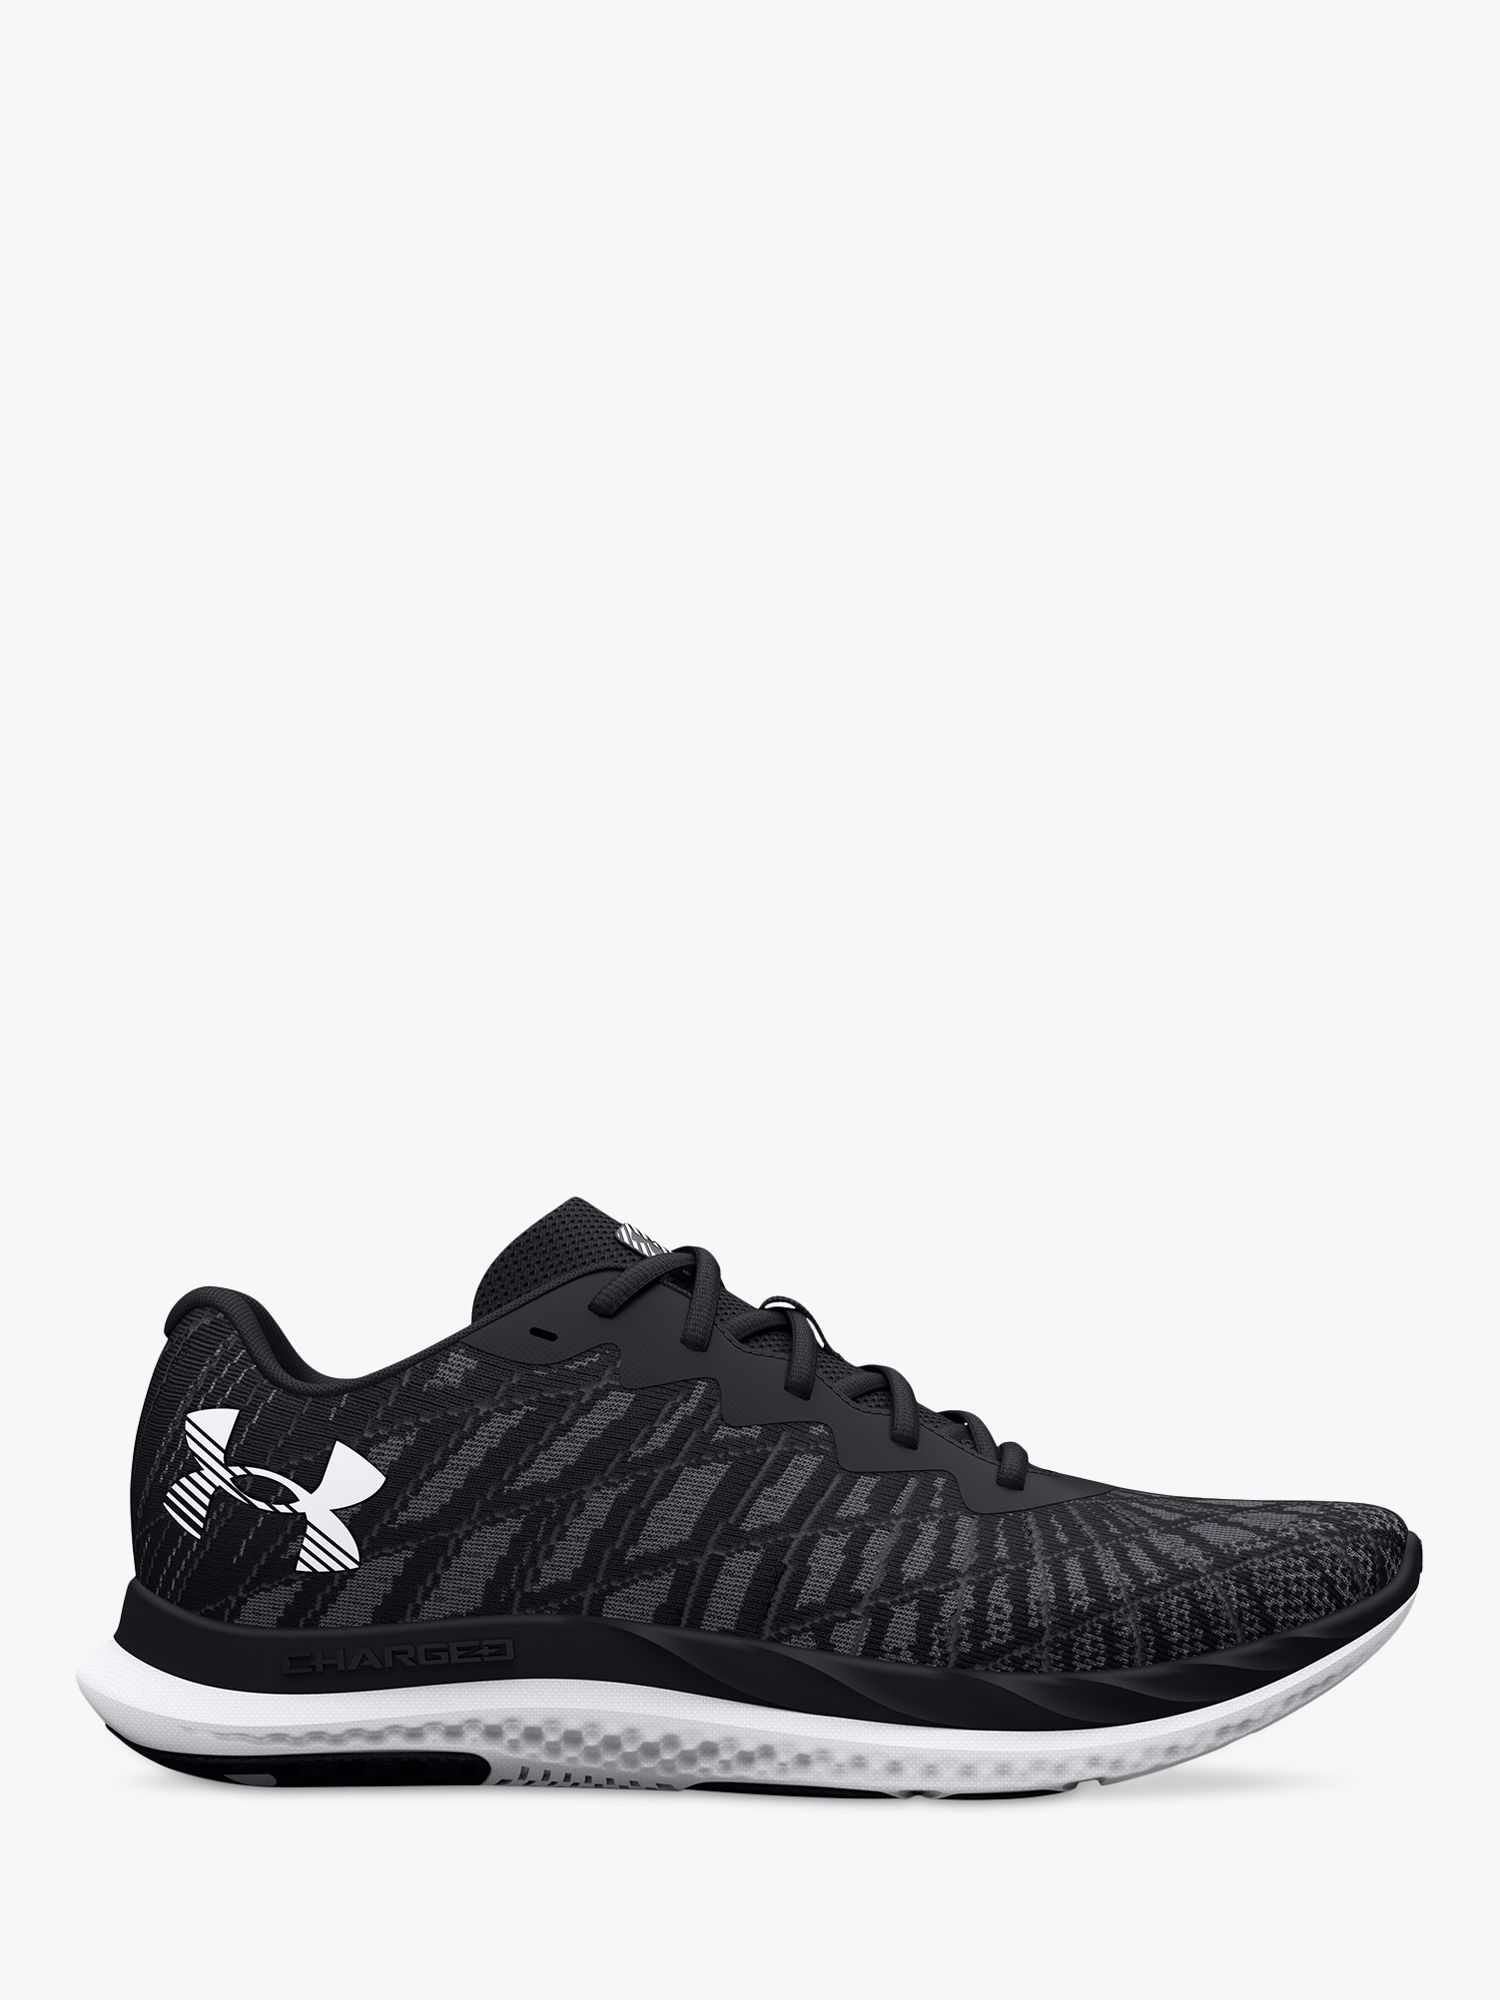 Under Armour Charged Breeze 2 Women's Running Shoes, Black/Jet Grey at John  Lewis & Partners